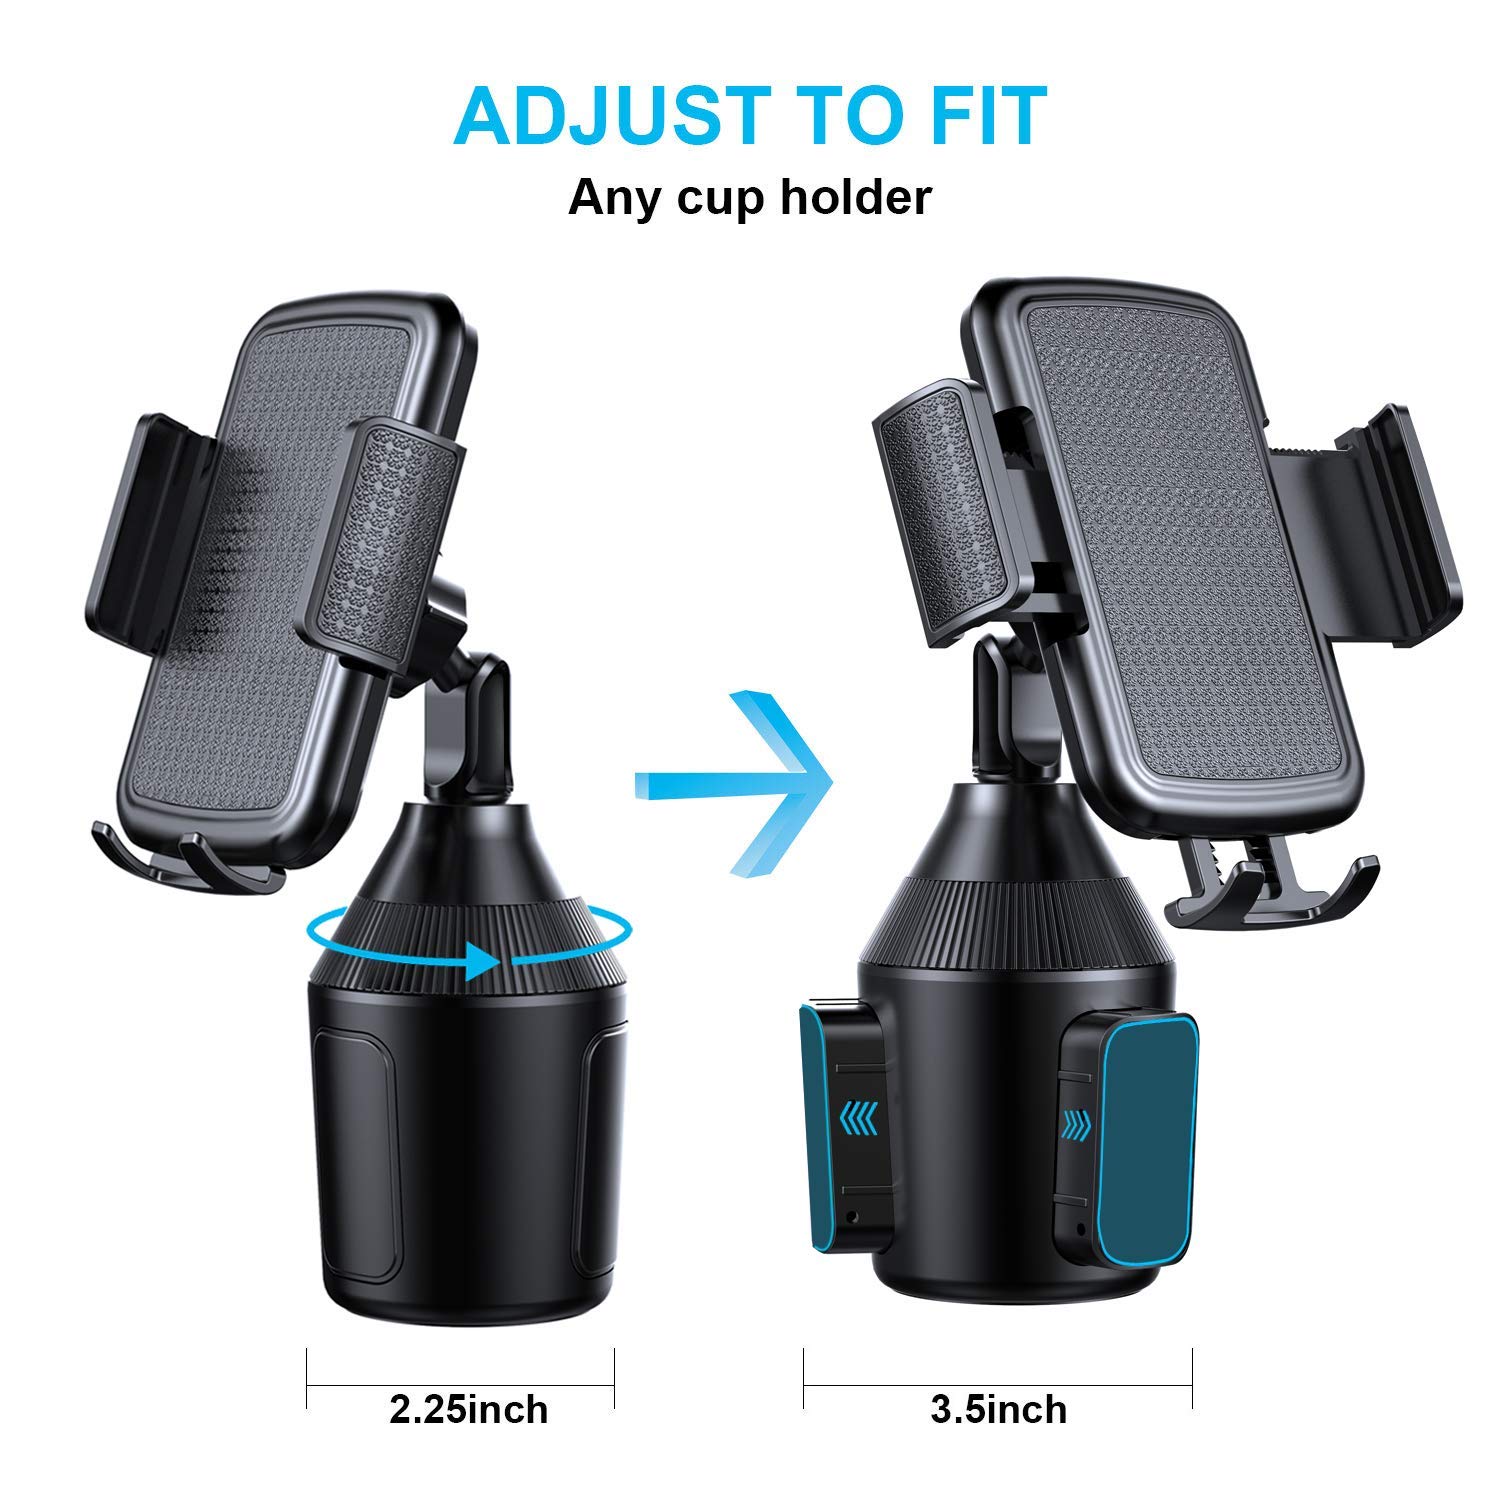 Cup Holder Phone Mount for Car Universal Adjustable Car Mount for iPhone 11 Pro Max/11 Pro/11/Xs/Max/X/XR/8/8/7/6 Plus,Note 10/Note 10+/Note 9/ S10+/ S10/ S9/ S9+/ S8 - image 5 of 6